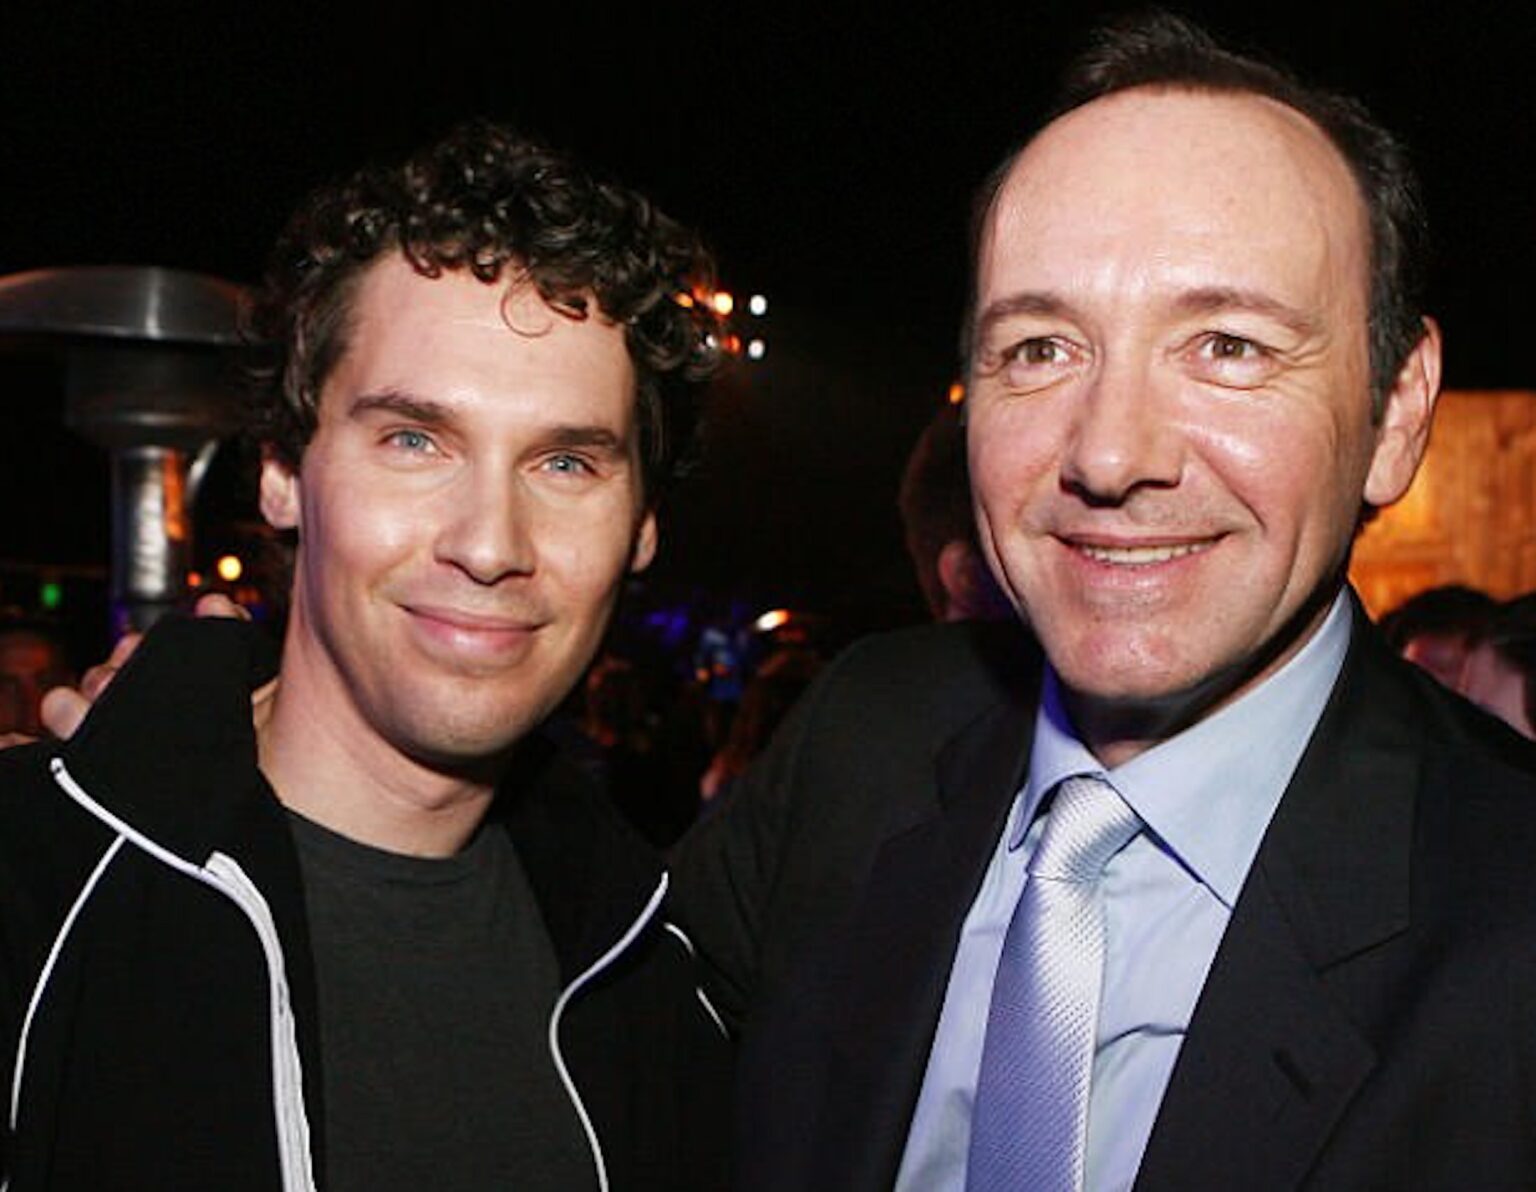 When Bryan Singer was fired from 'Bohemian Rhapsody', most believed it was due to his sexual assault allegations against him. Here's what we know.